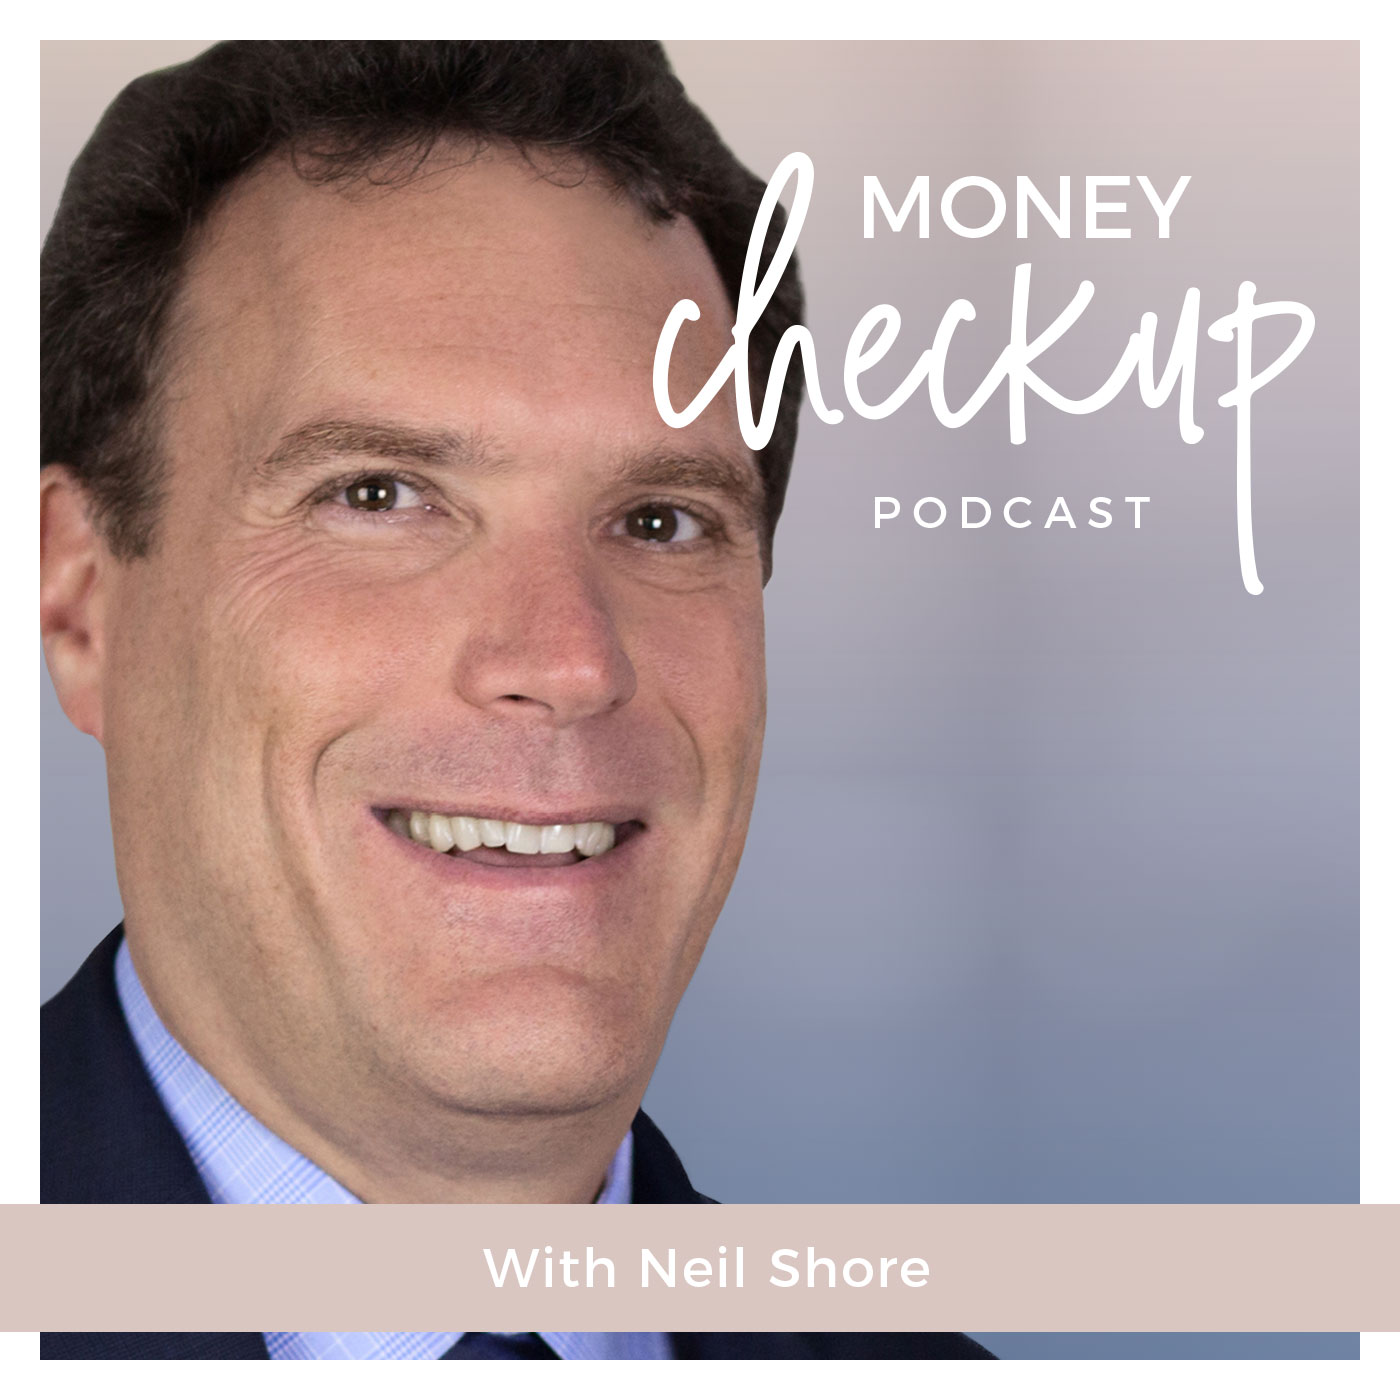 Money Checkup Podcast With Neil Shore